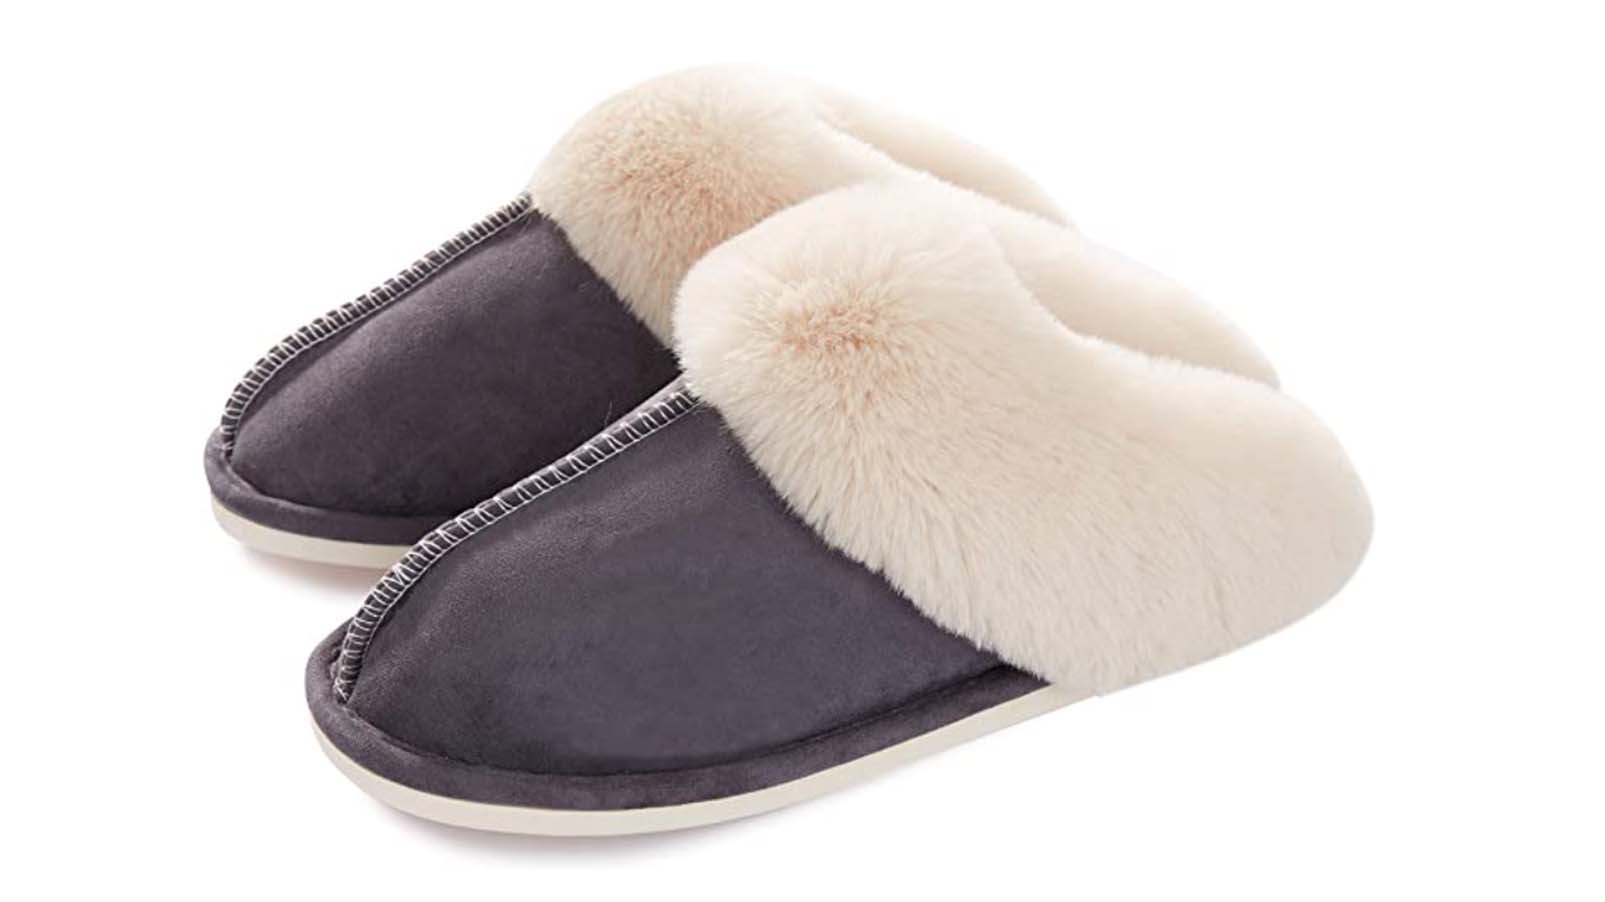 Stella House Slippers Fur Warm Indoor Outdoor Comfy Slip On House Slippers